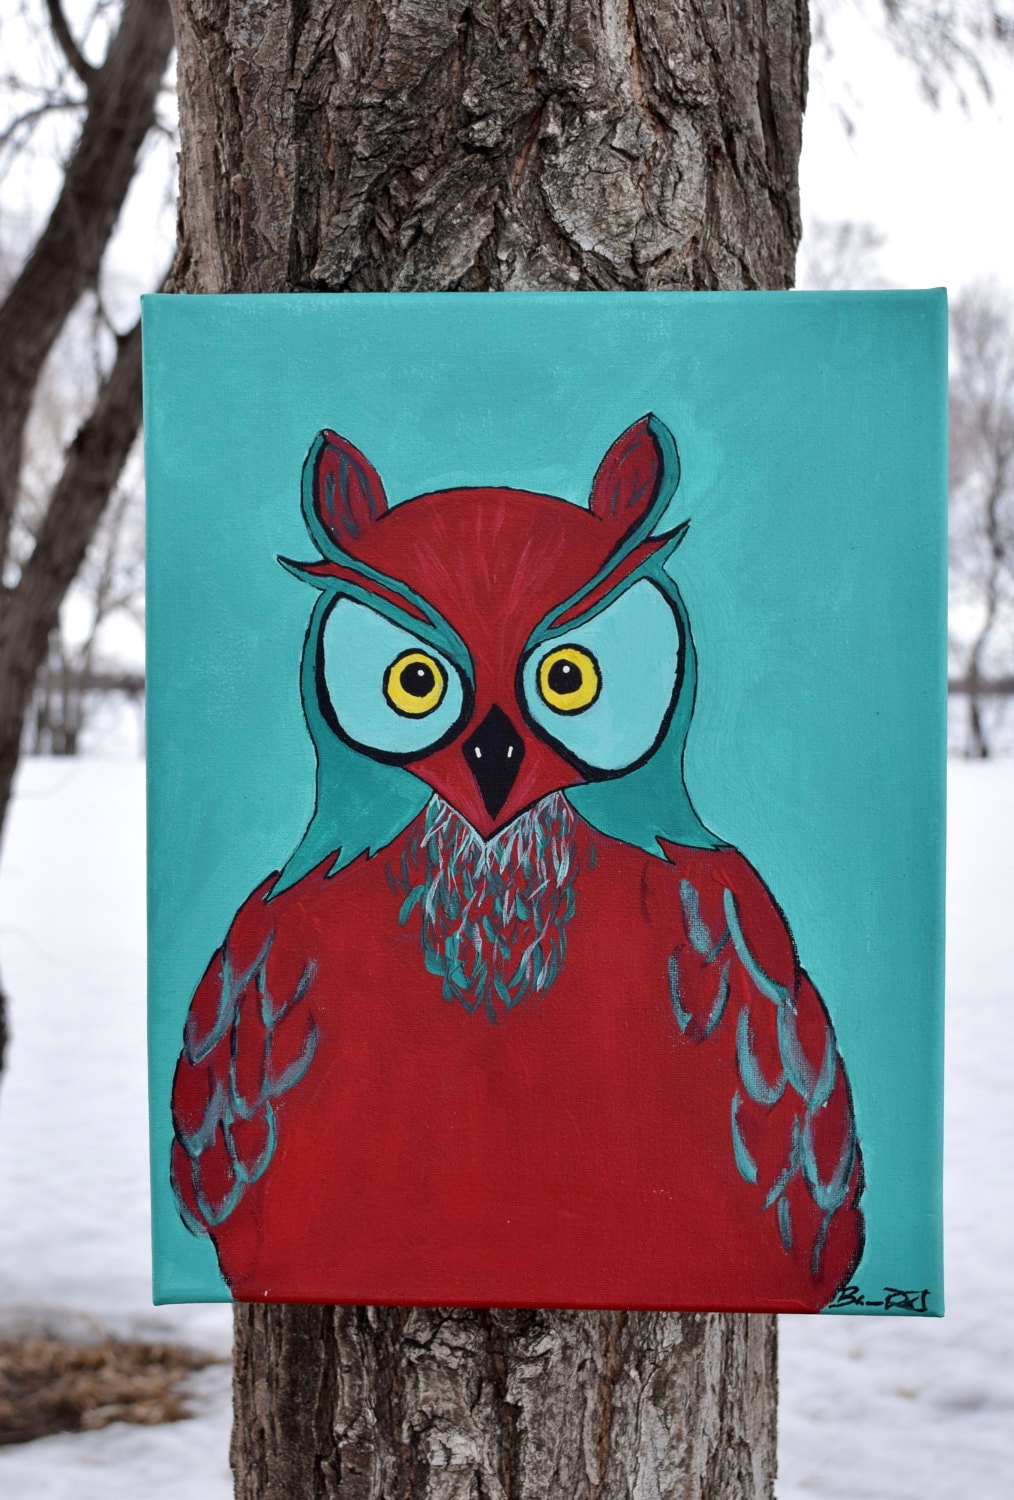 Horned Owl painting Teal Owl red night owl whimsical animal